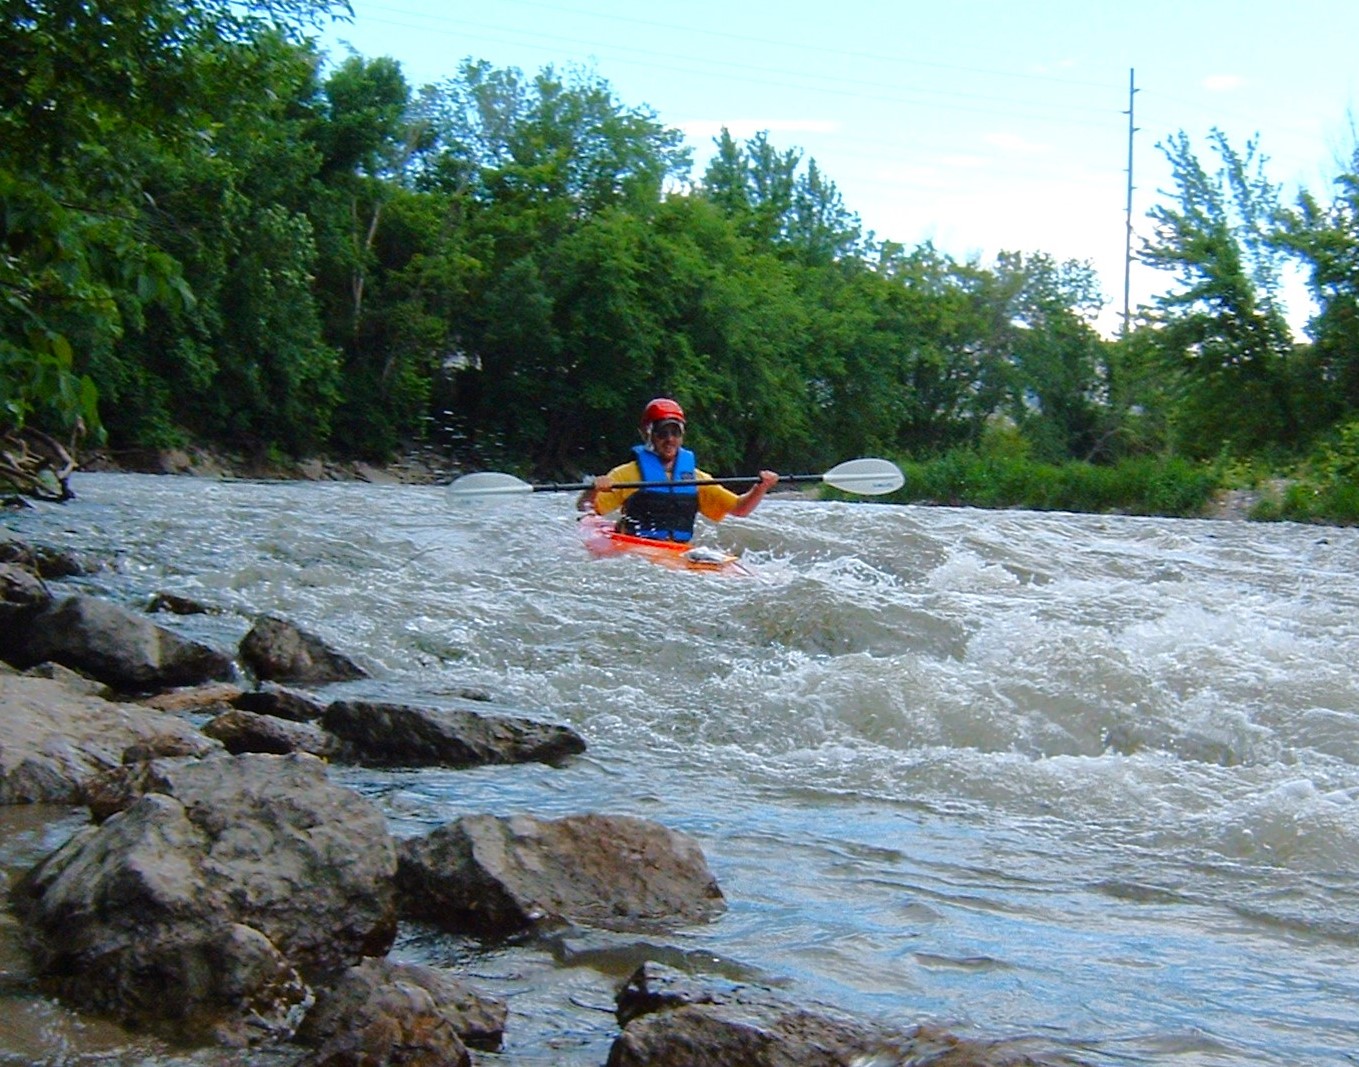 A man in an orange kayak and blue life vest navigates rapids near the shore of a water trail with forest in the background.